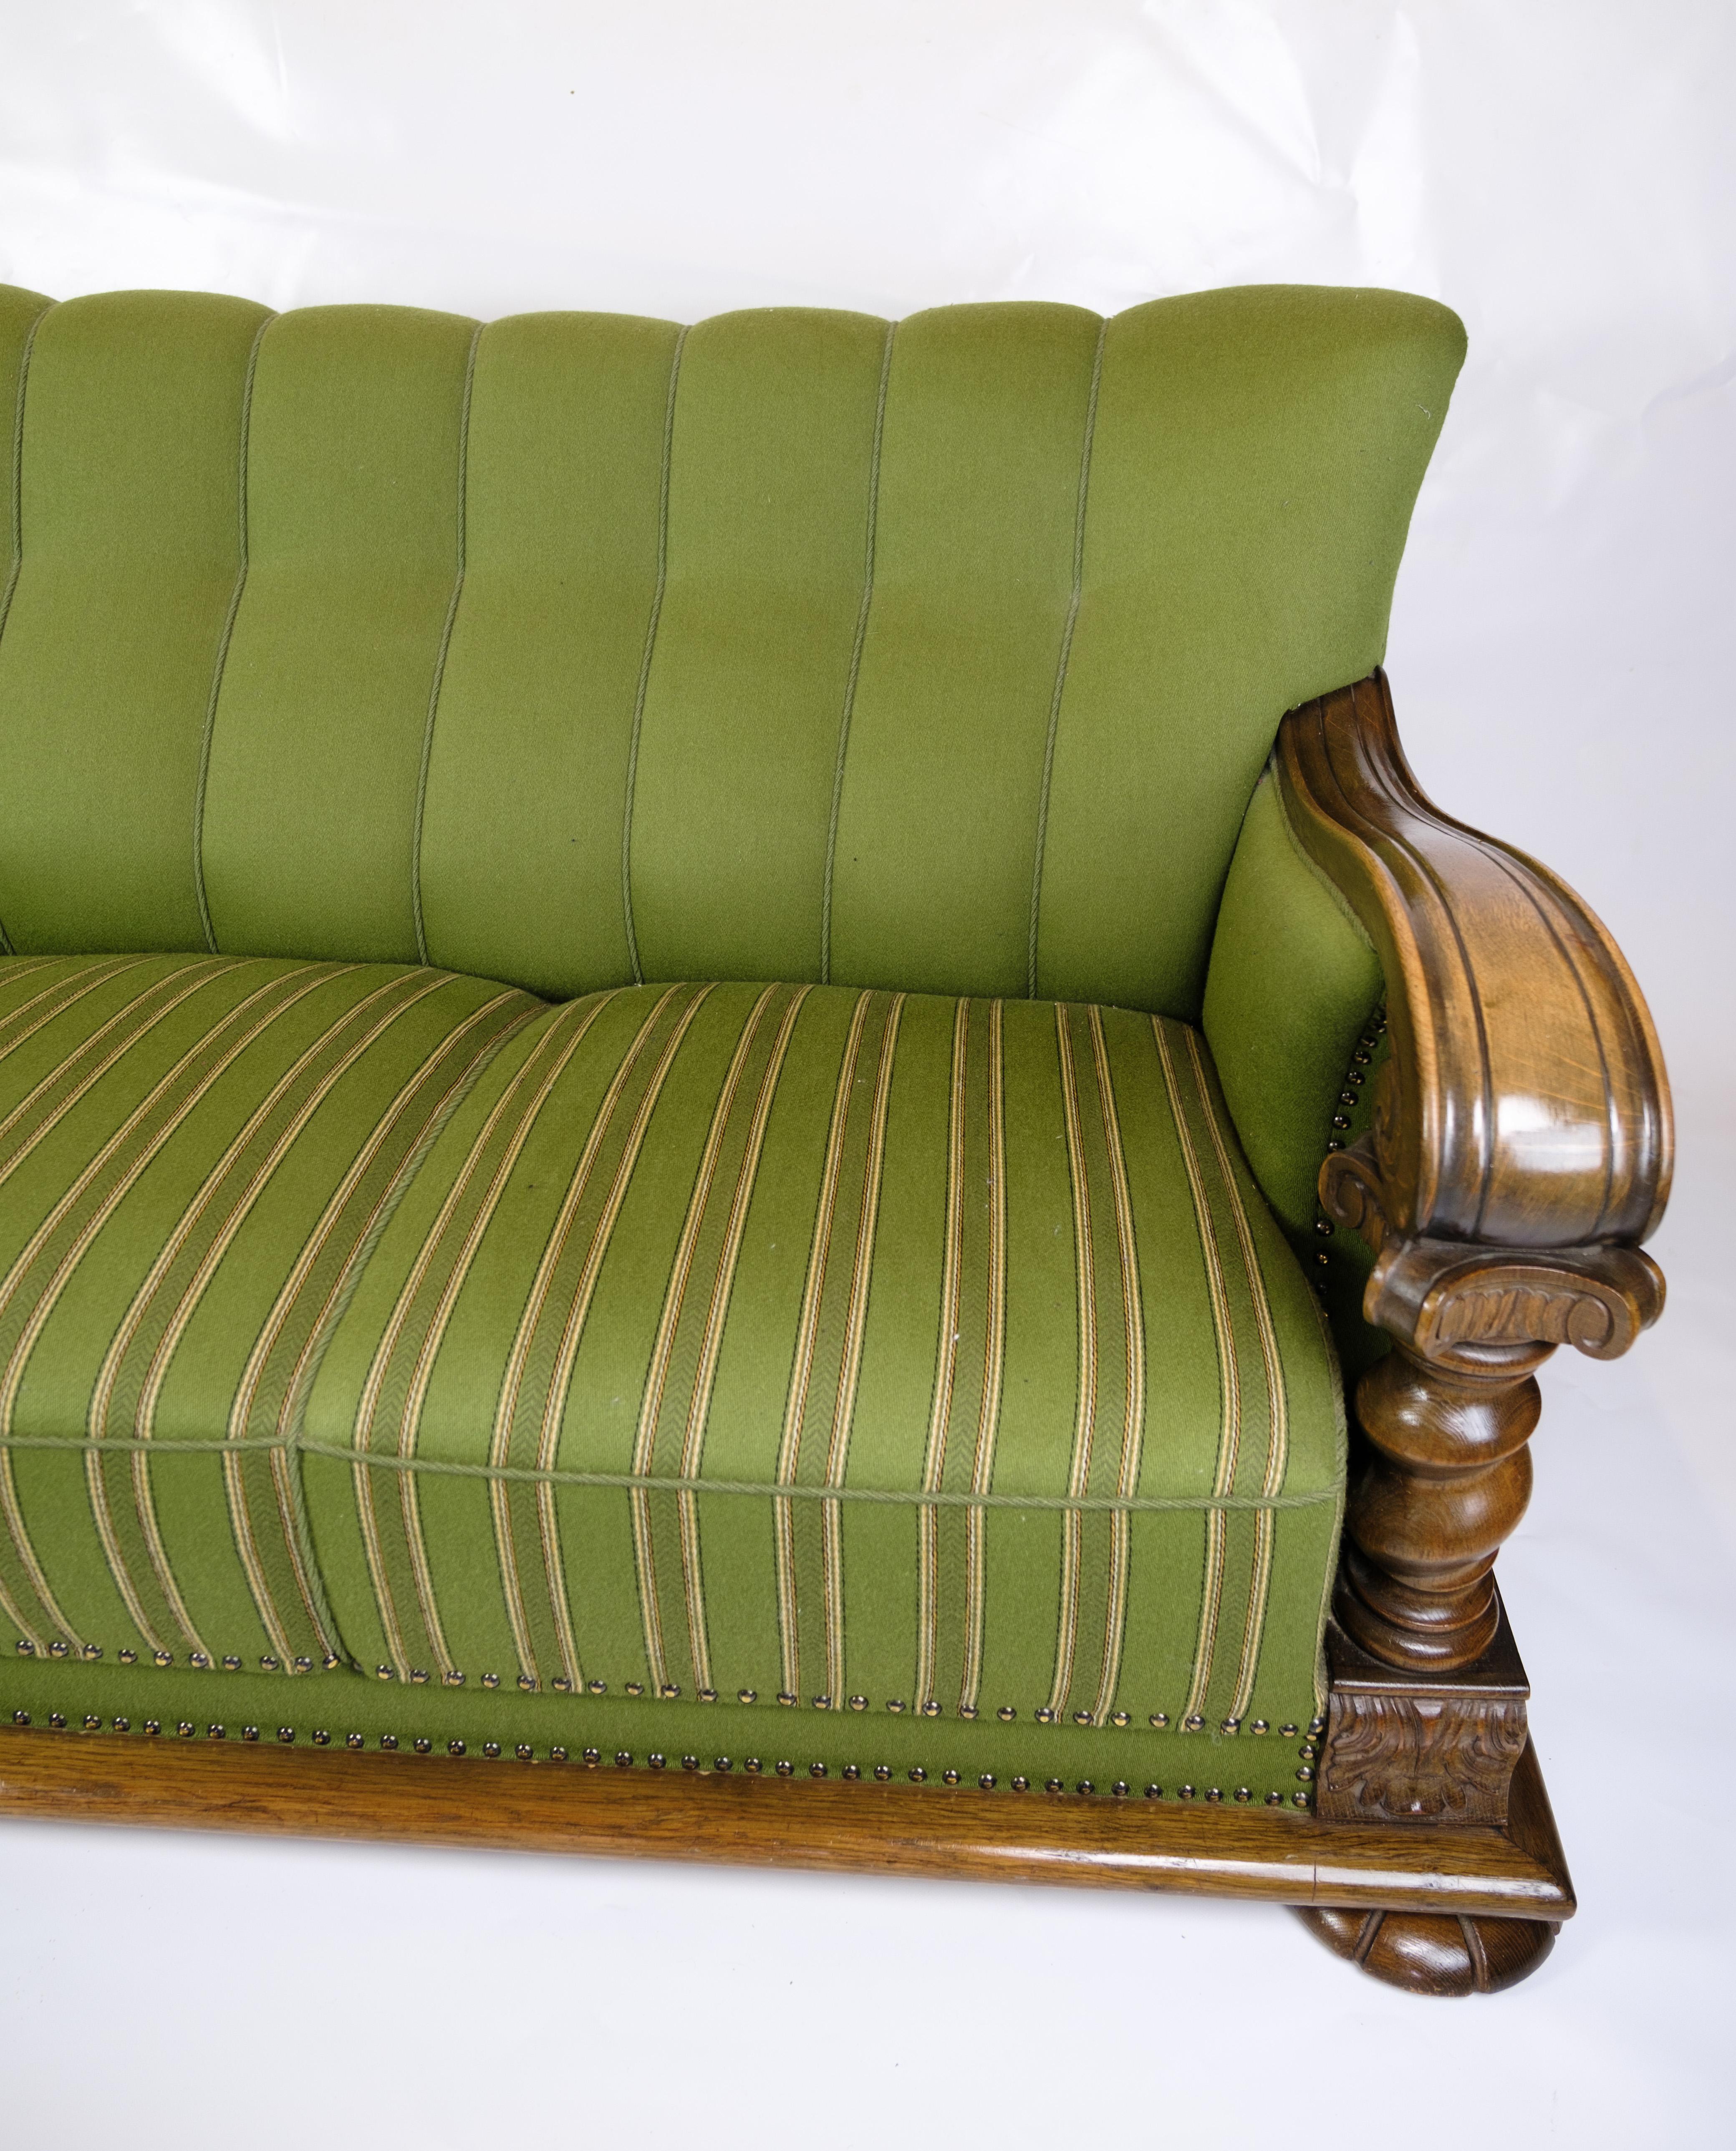 Early 20th Century Sofa in Green fabric with Wood Carvings from 1920s.